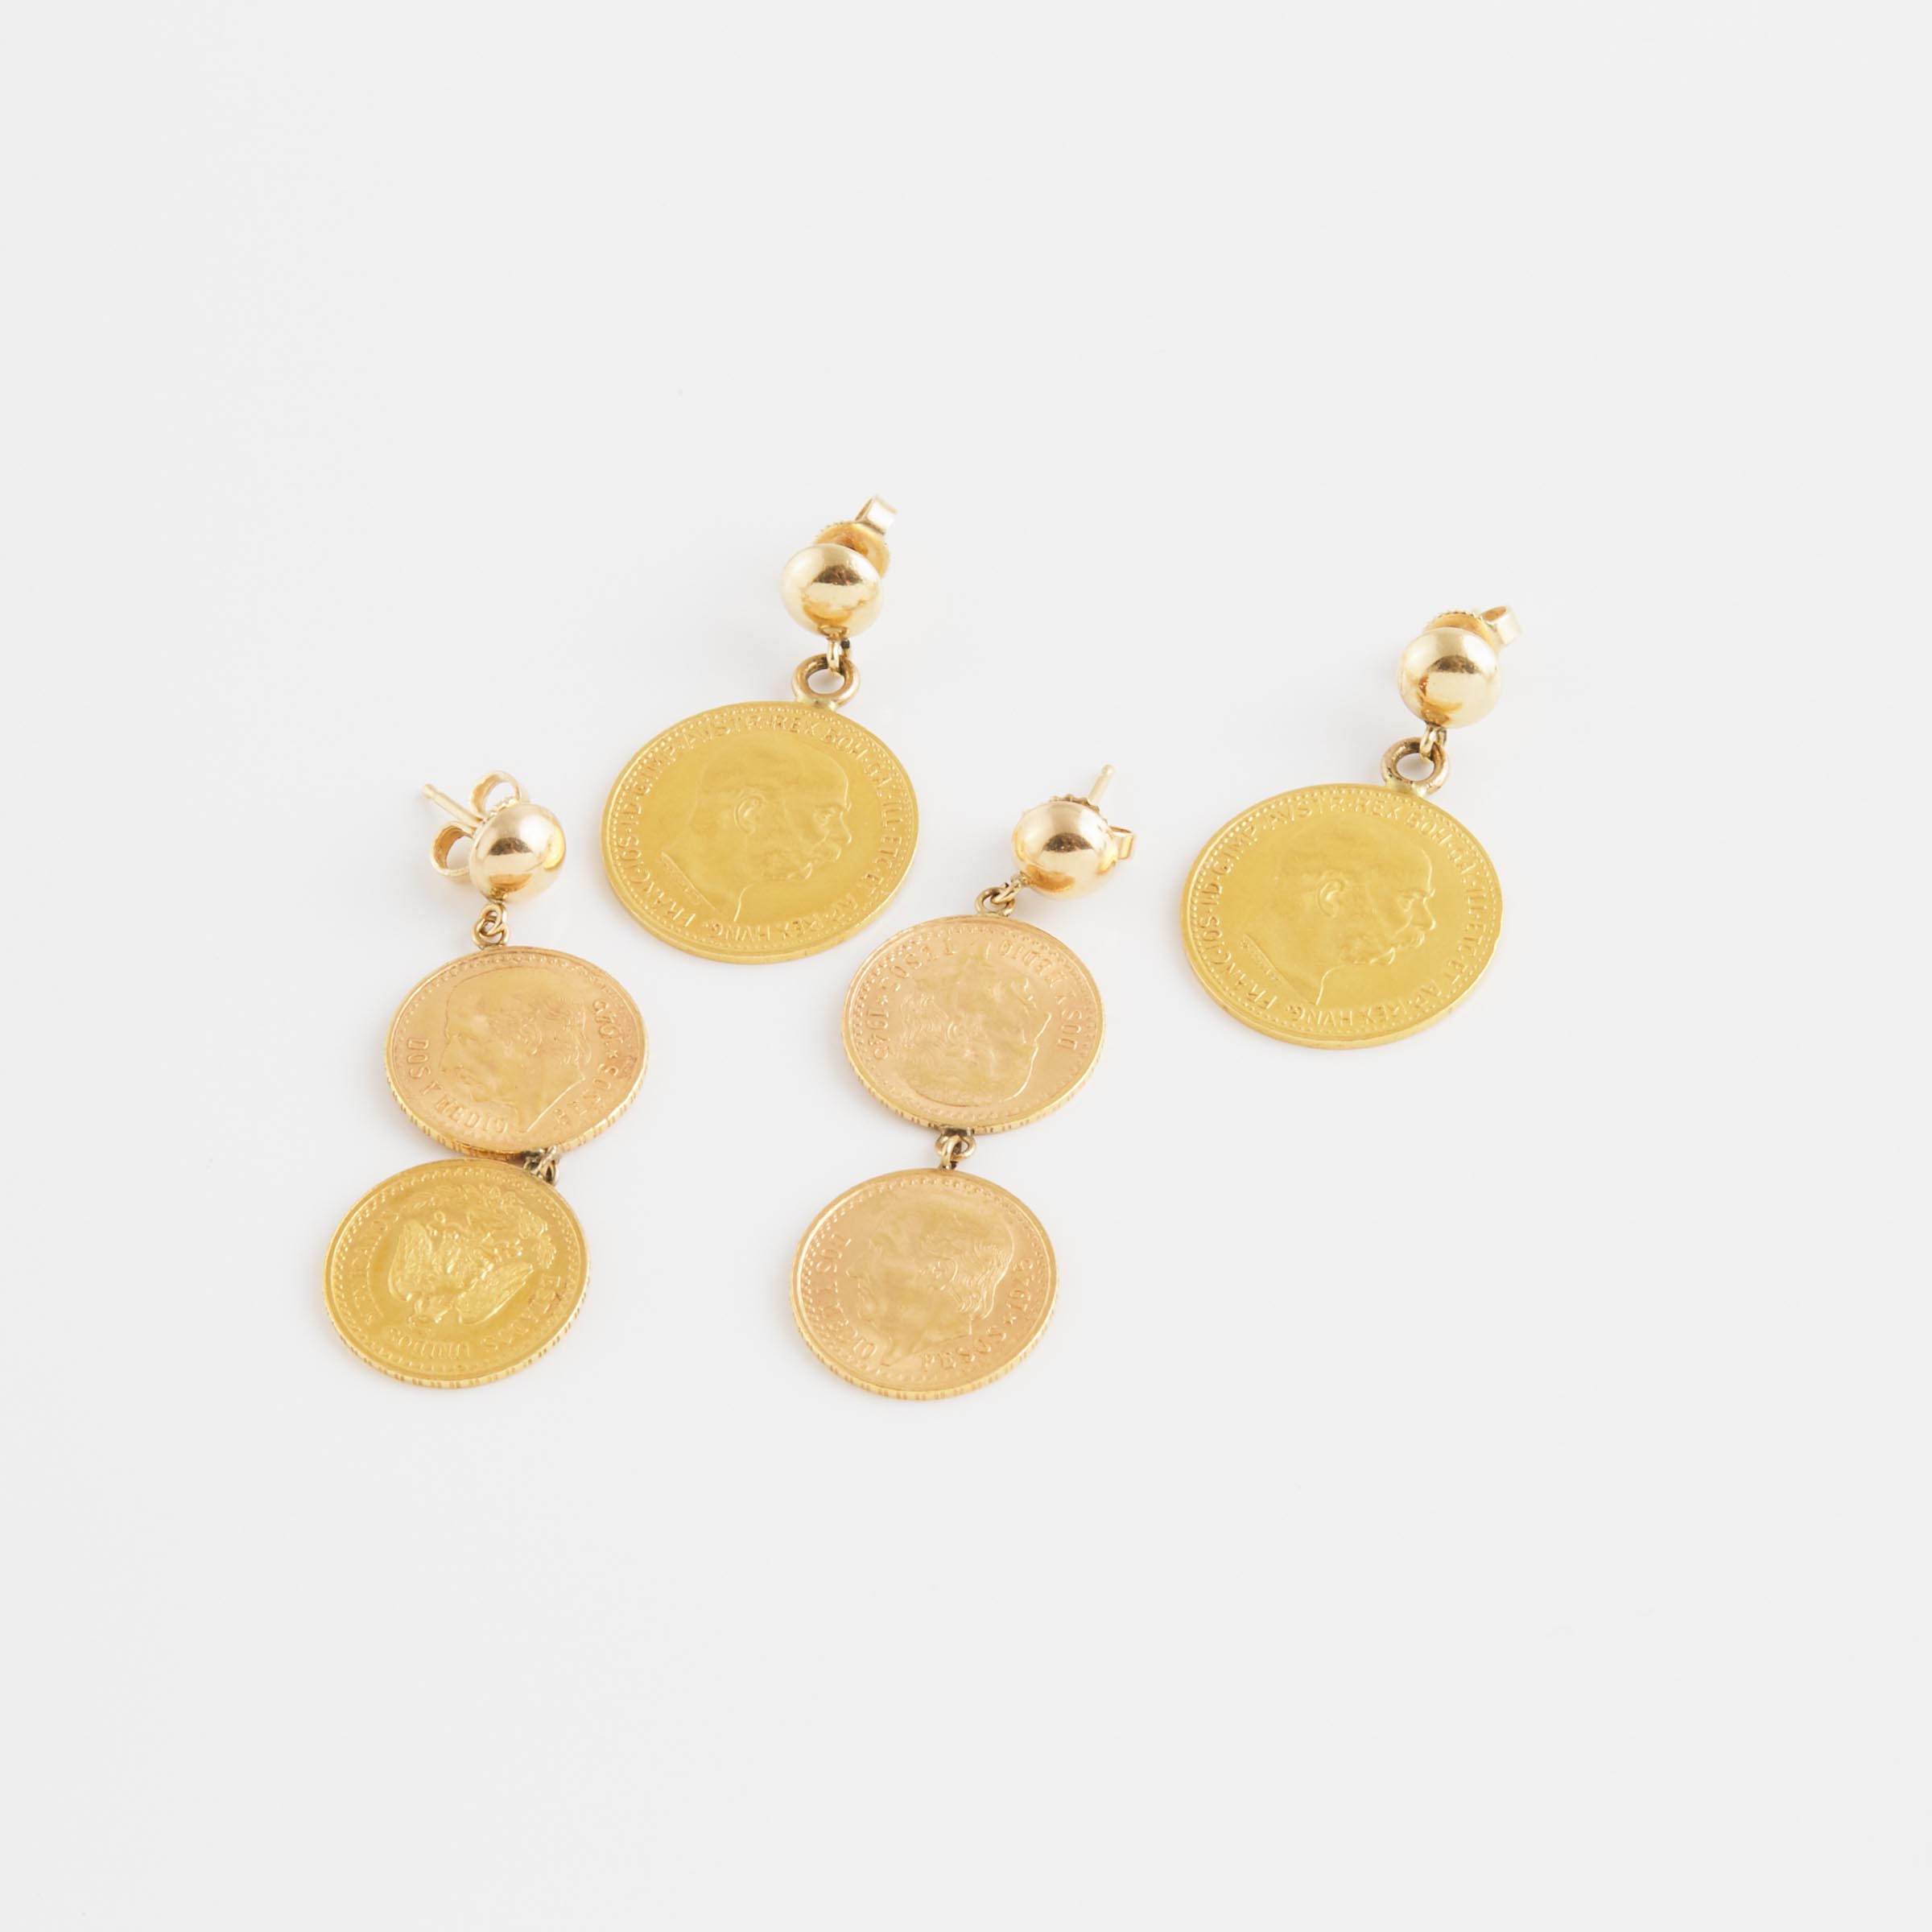 2 Pairs Of Gold Coin Earrings